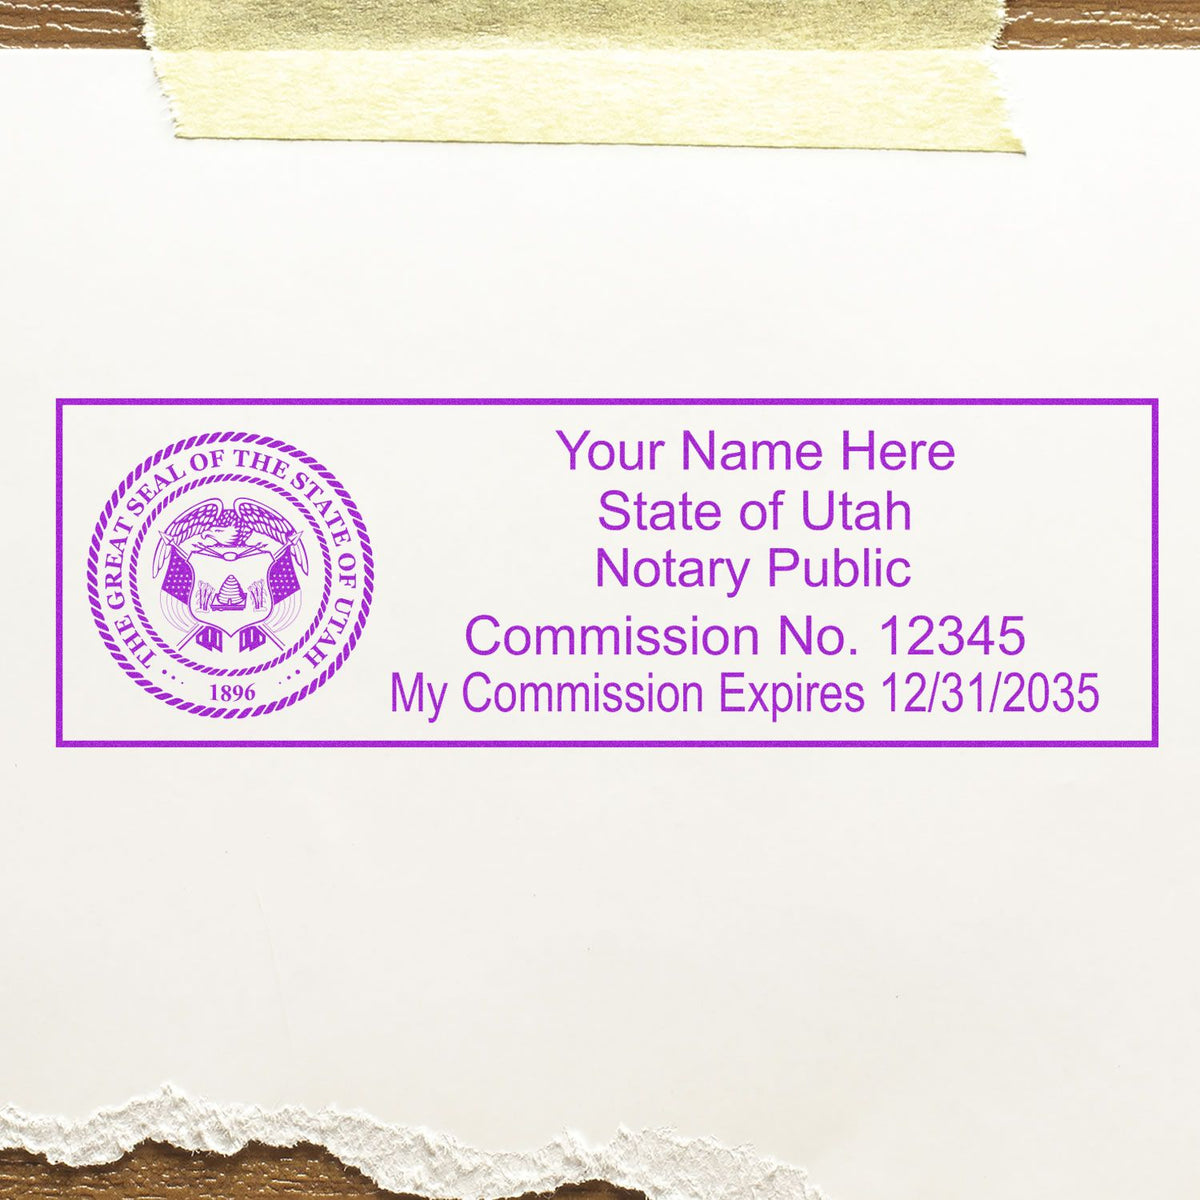 The Self-Inking State Seal Utah Notary Stamp stamp impression comes to life with a crisp, detailed photo on paper - showcasing true professional quality.